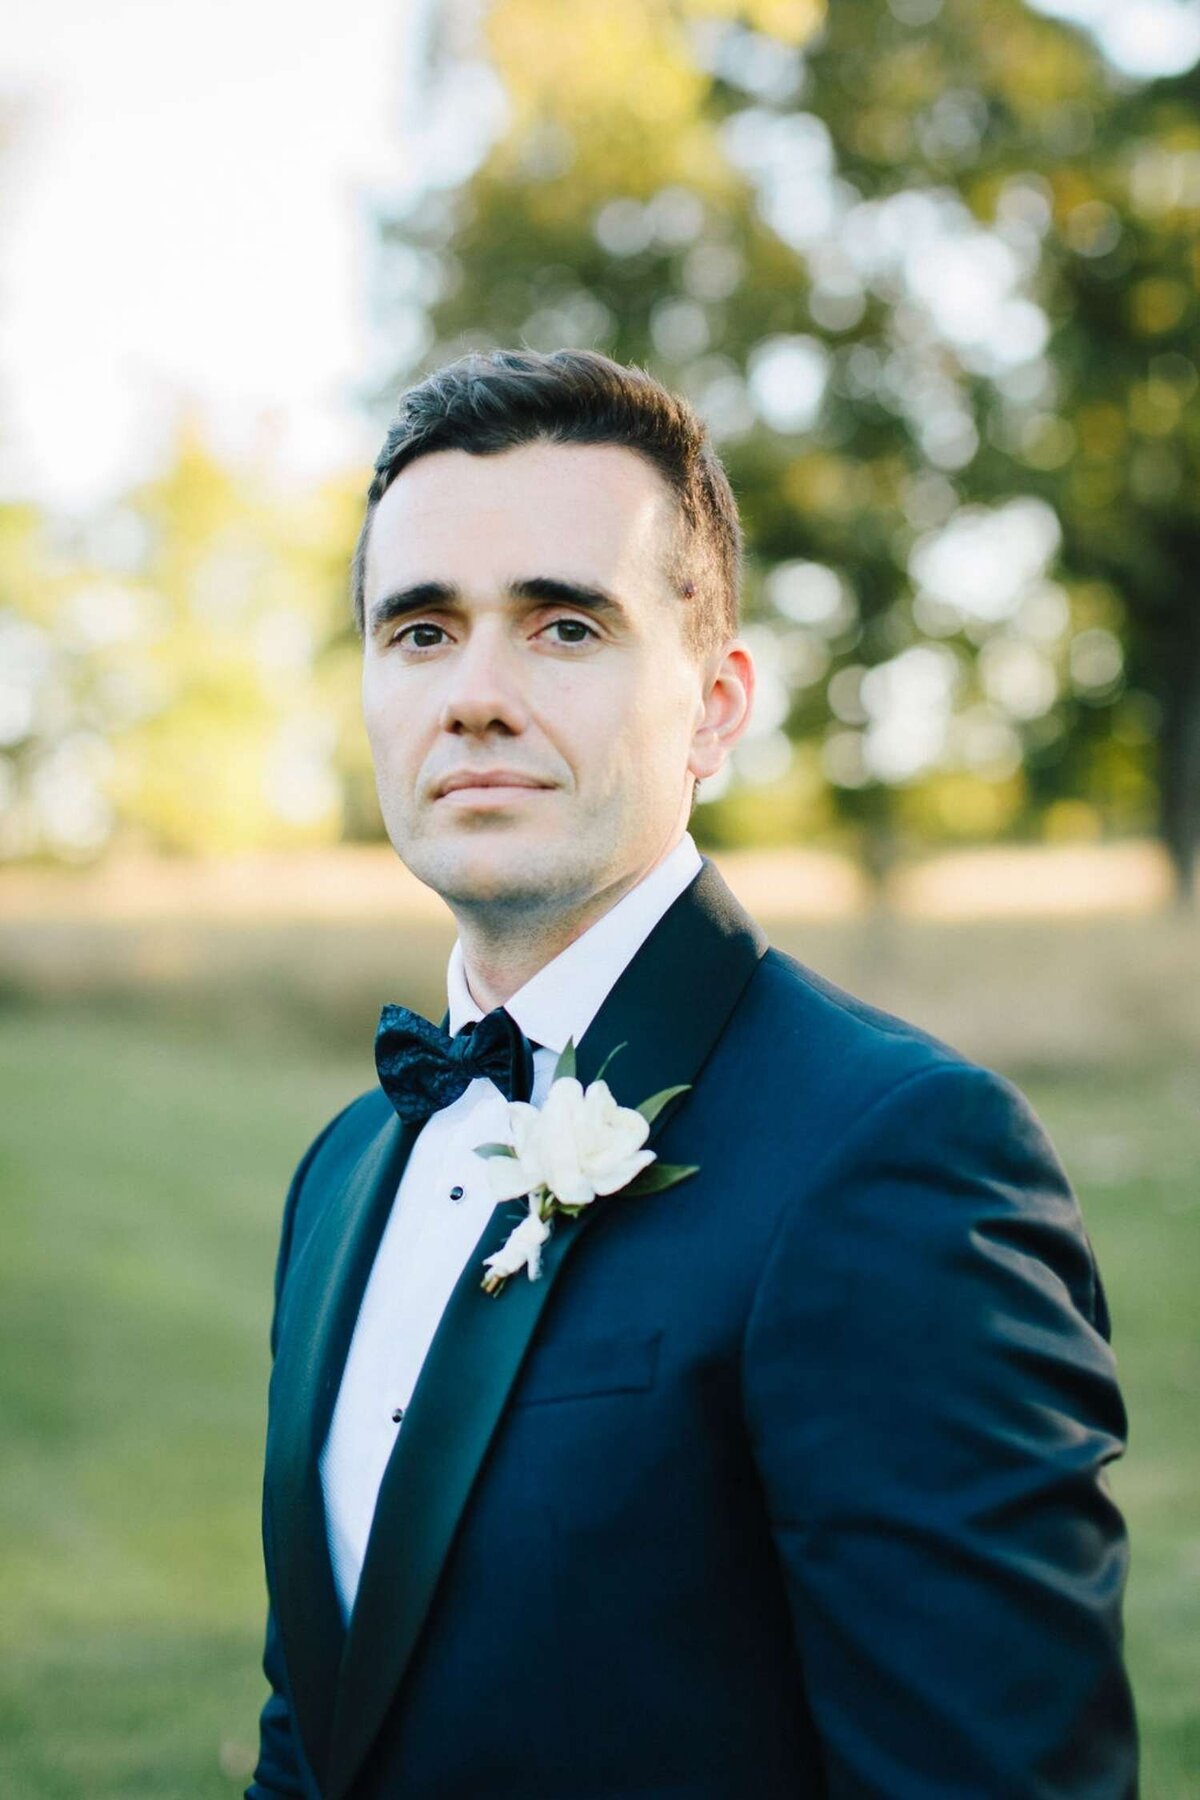 A Groom's Portrait Outdoors at a Luxury Michigan Lakefront Golf Club Wedding